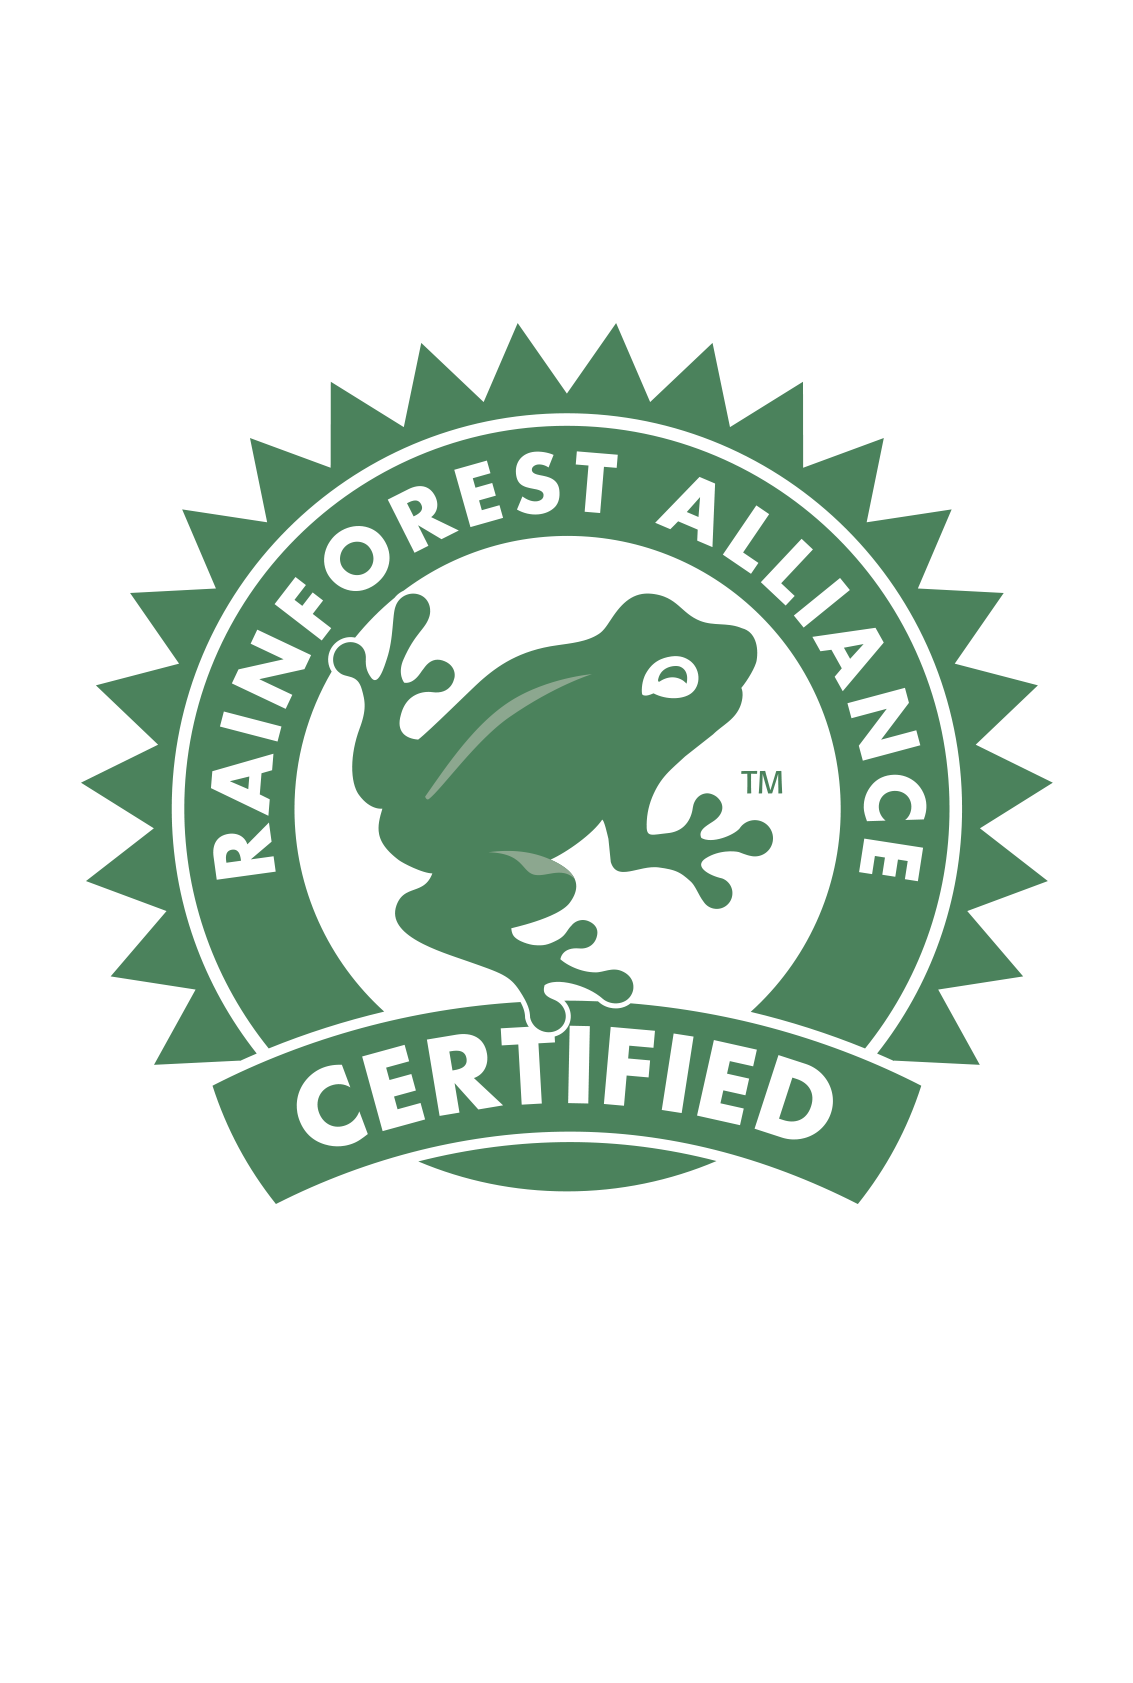 Rainforest Alliance Certified for Sustainability